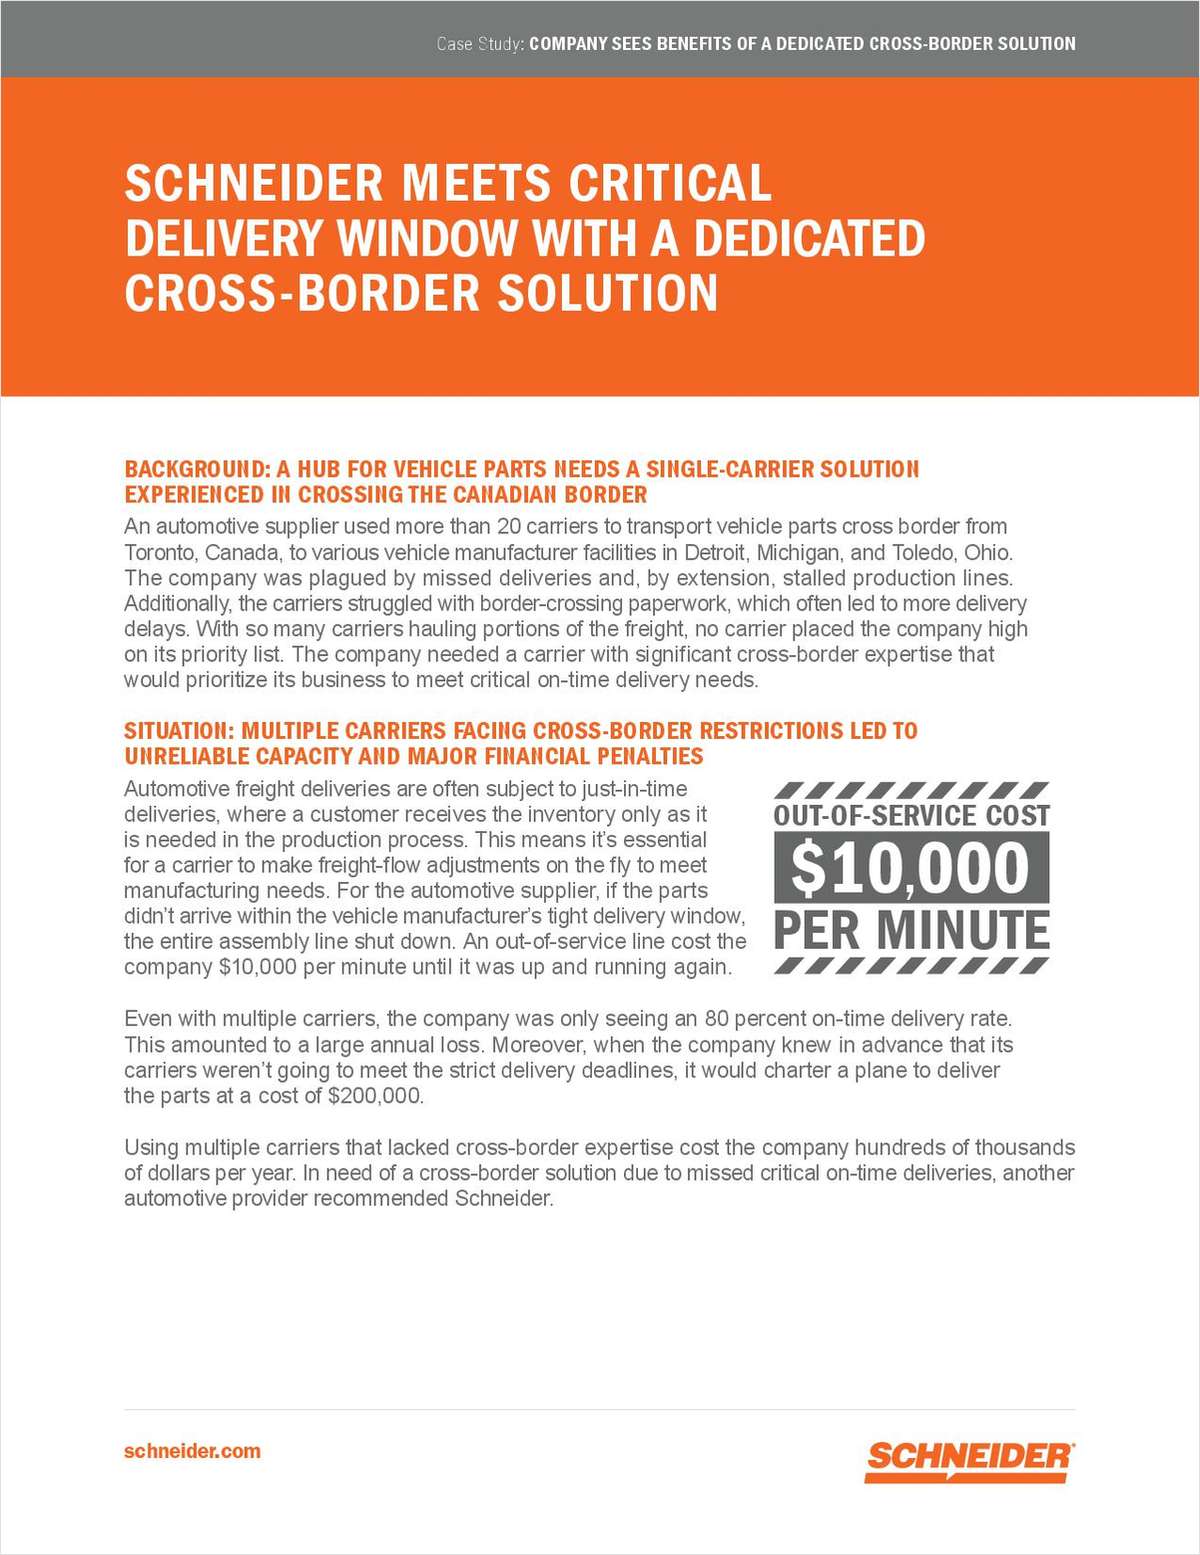 Automotive Supplier Saves MILLIONS by having Schneider flex to Meet their Capacity and Delivery Needs, A Case Study